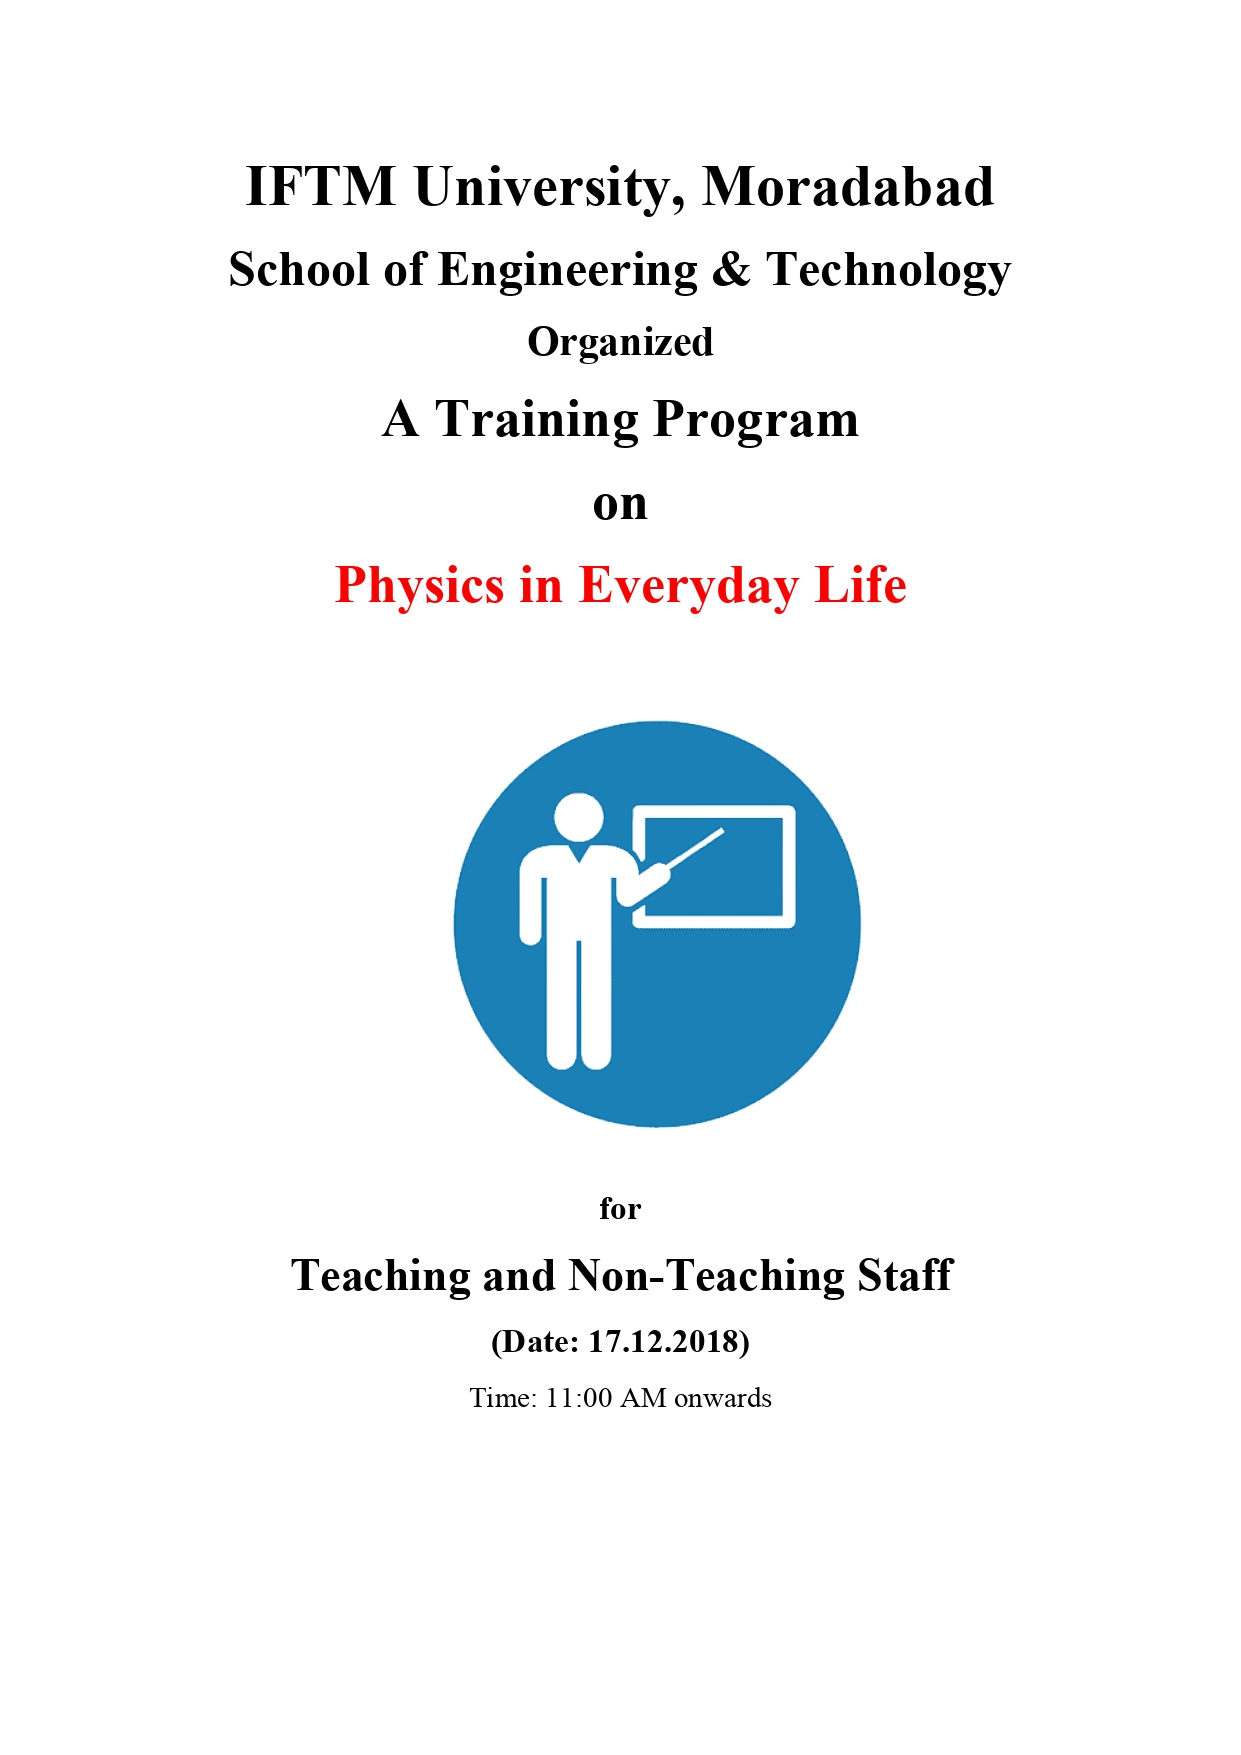 Training Programme on Physics in everyday life for Teaching and Non-Teaching Staff